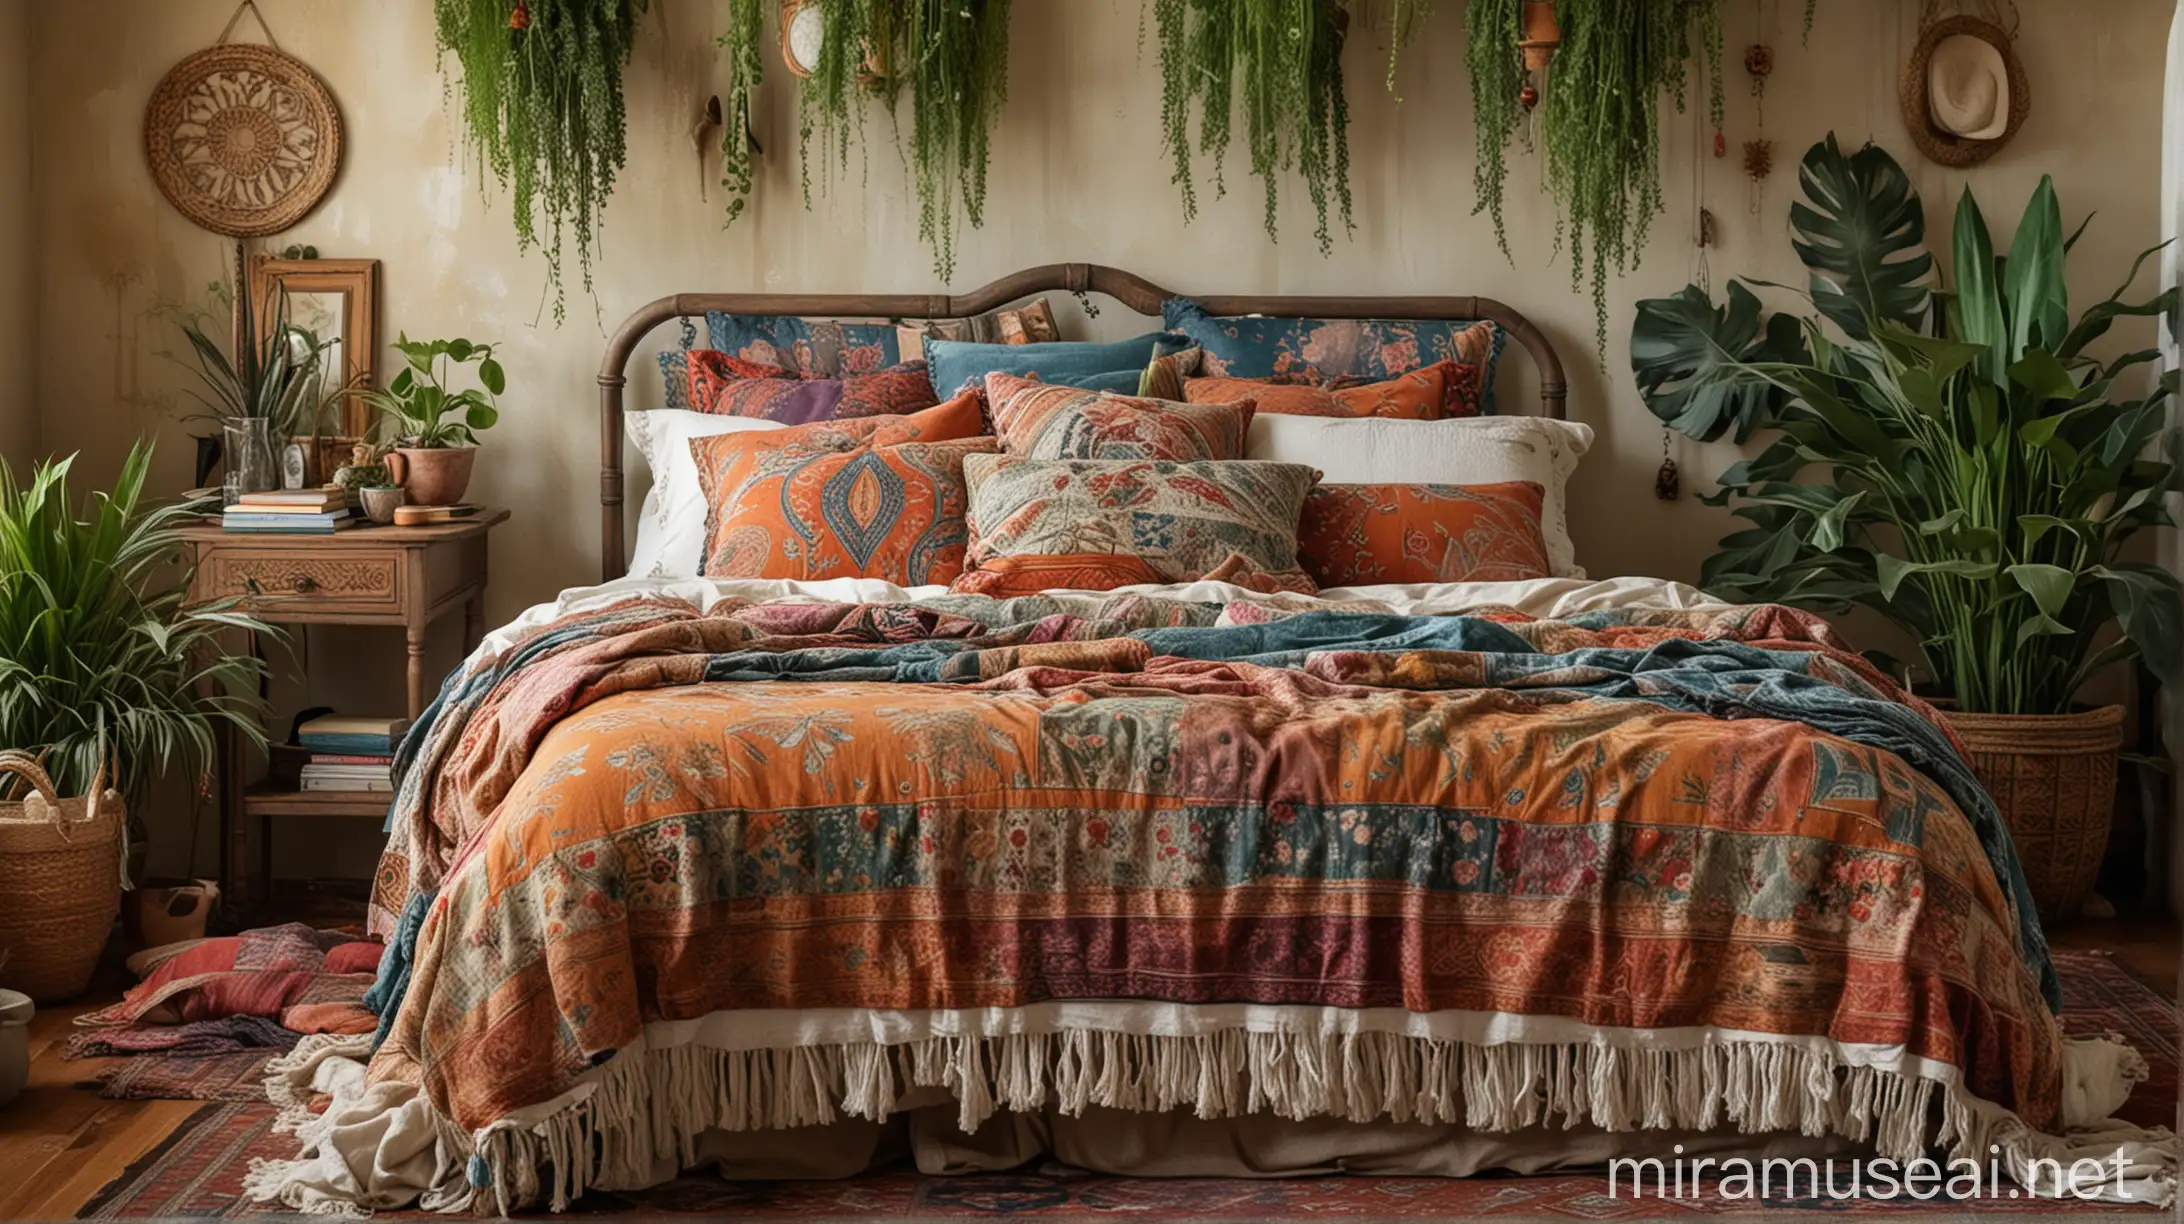 Whimsical Bohemian Bedroom with Layered Textures and Plants